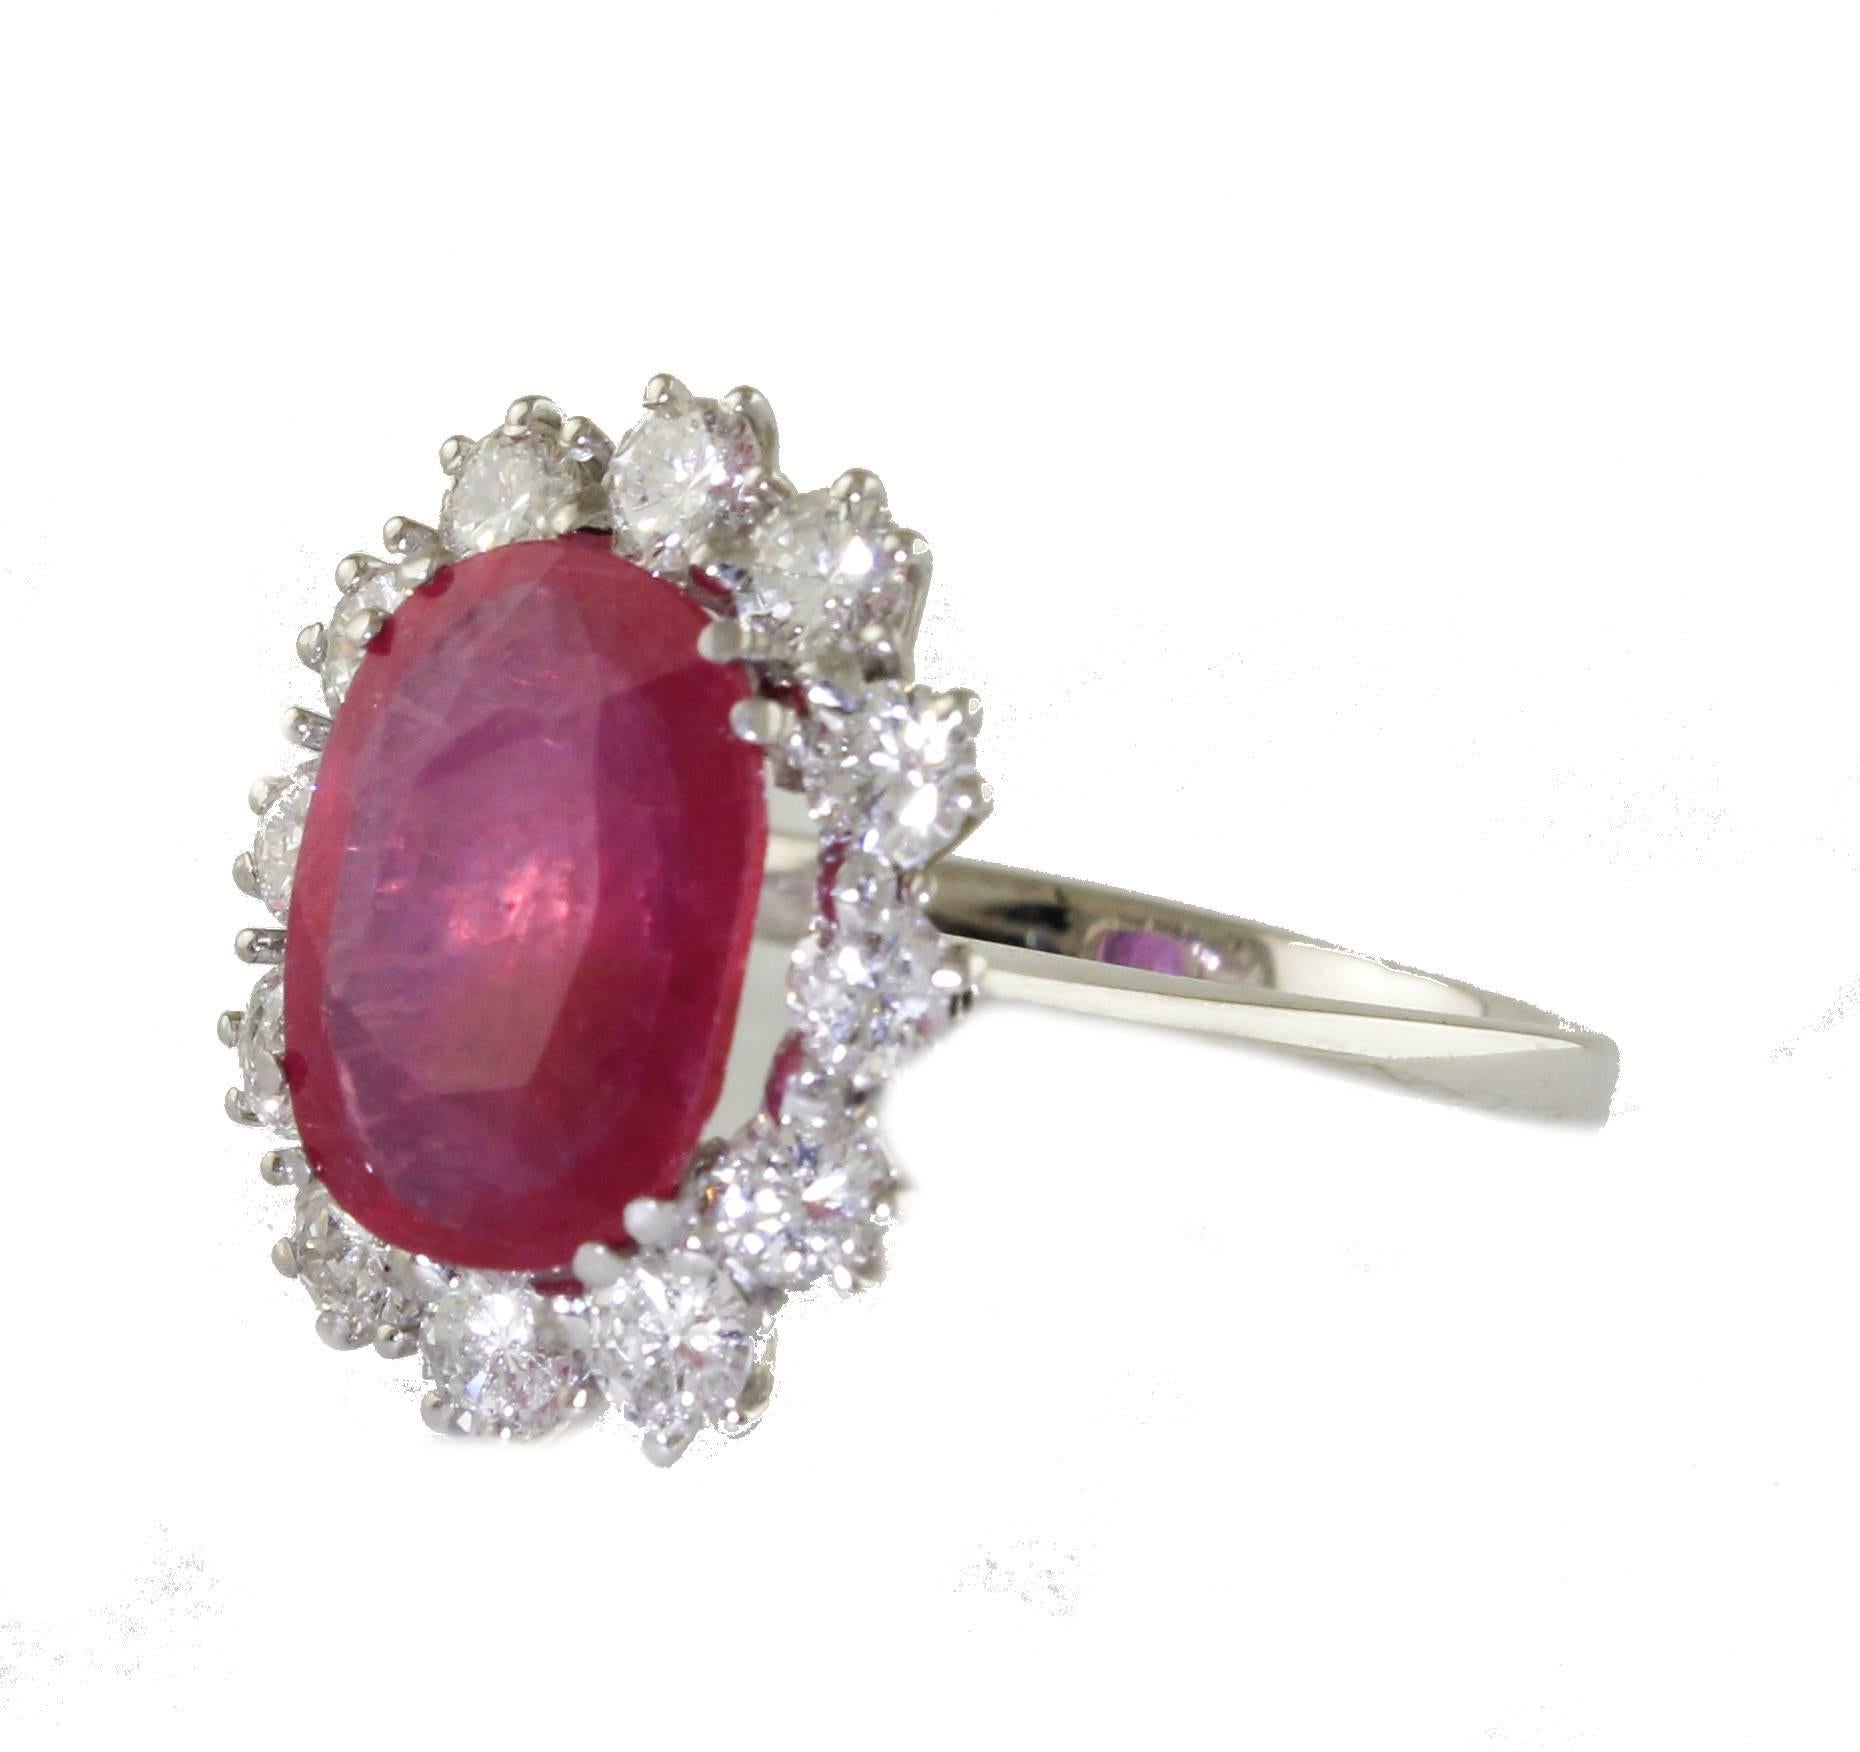 Elegant 18 kt white gold ring with 1.60 ct diamonds surrounding a very precious 3.65 ct ruby. Total weight g 5,00.
Diamonds ct 1.60
Ruby ct 3.65
Size ita 15
Size franc 55
Size uses 7.17
Total weight g 5.00
R.F + hrha

For any enquires, please